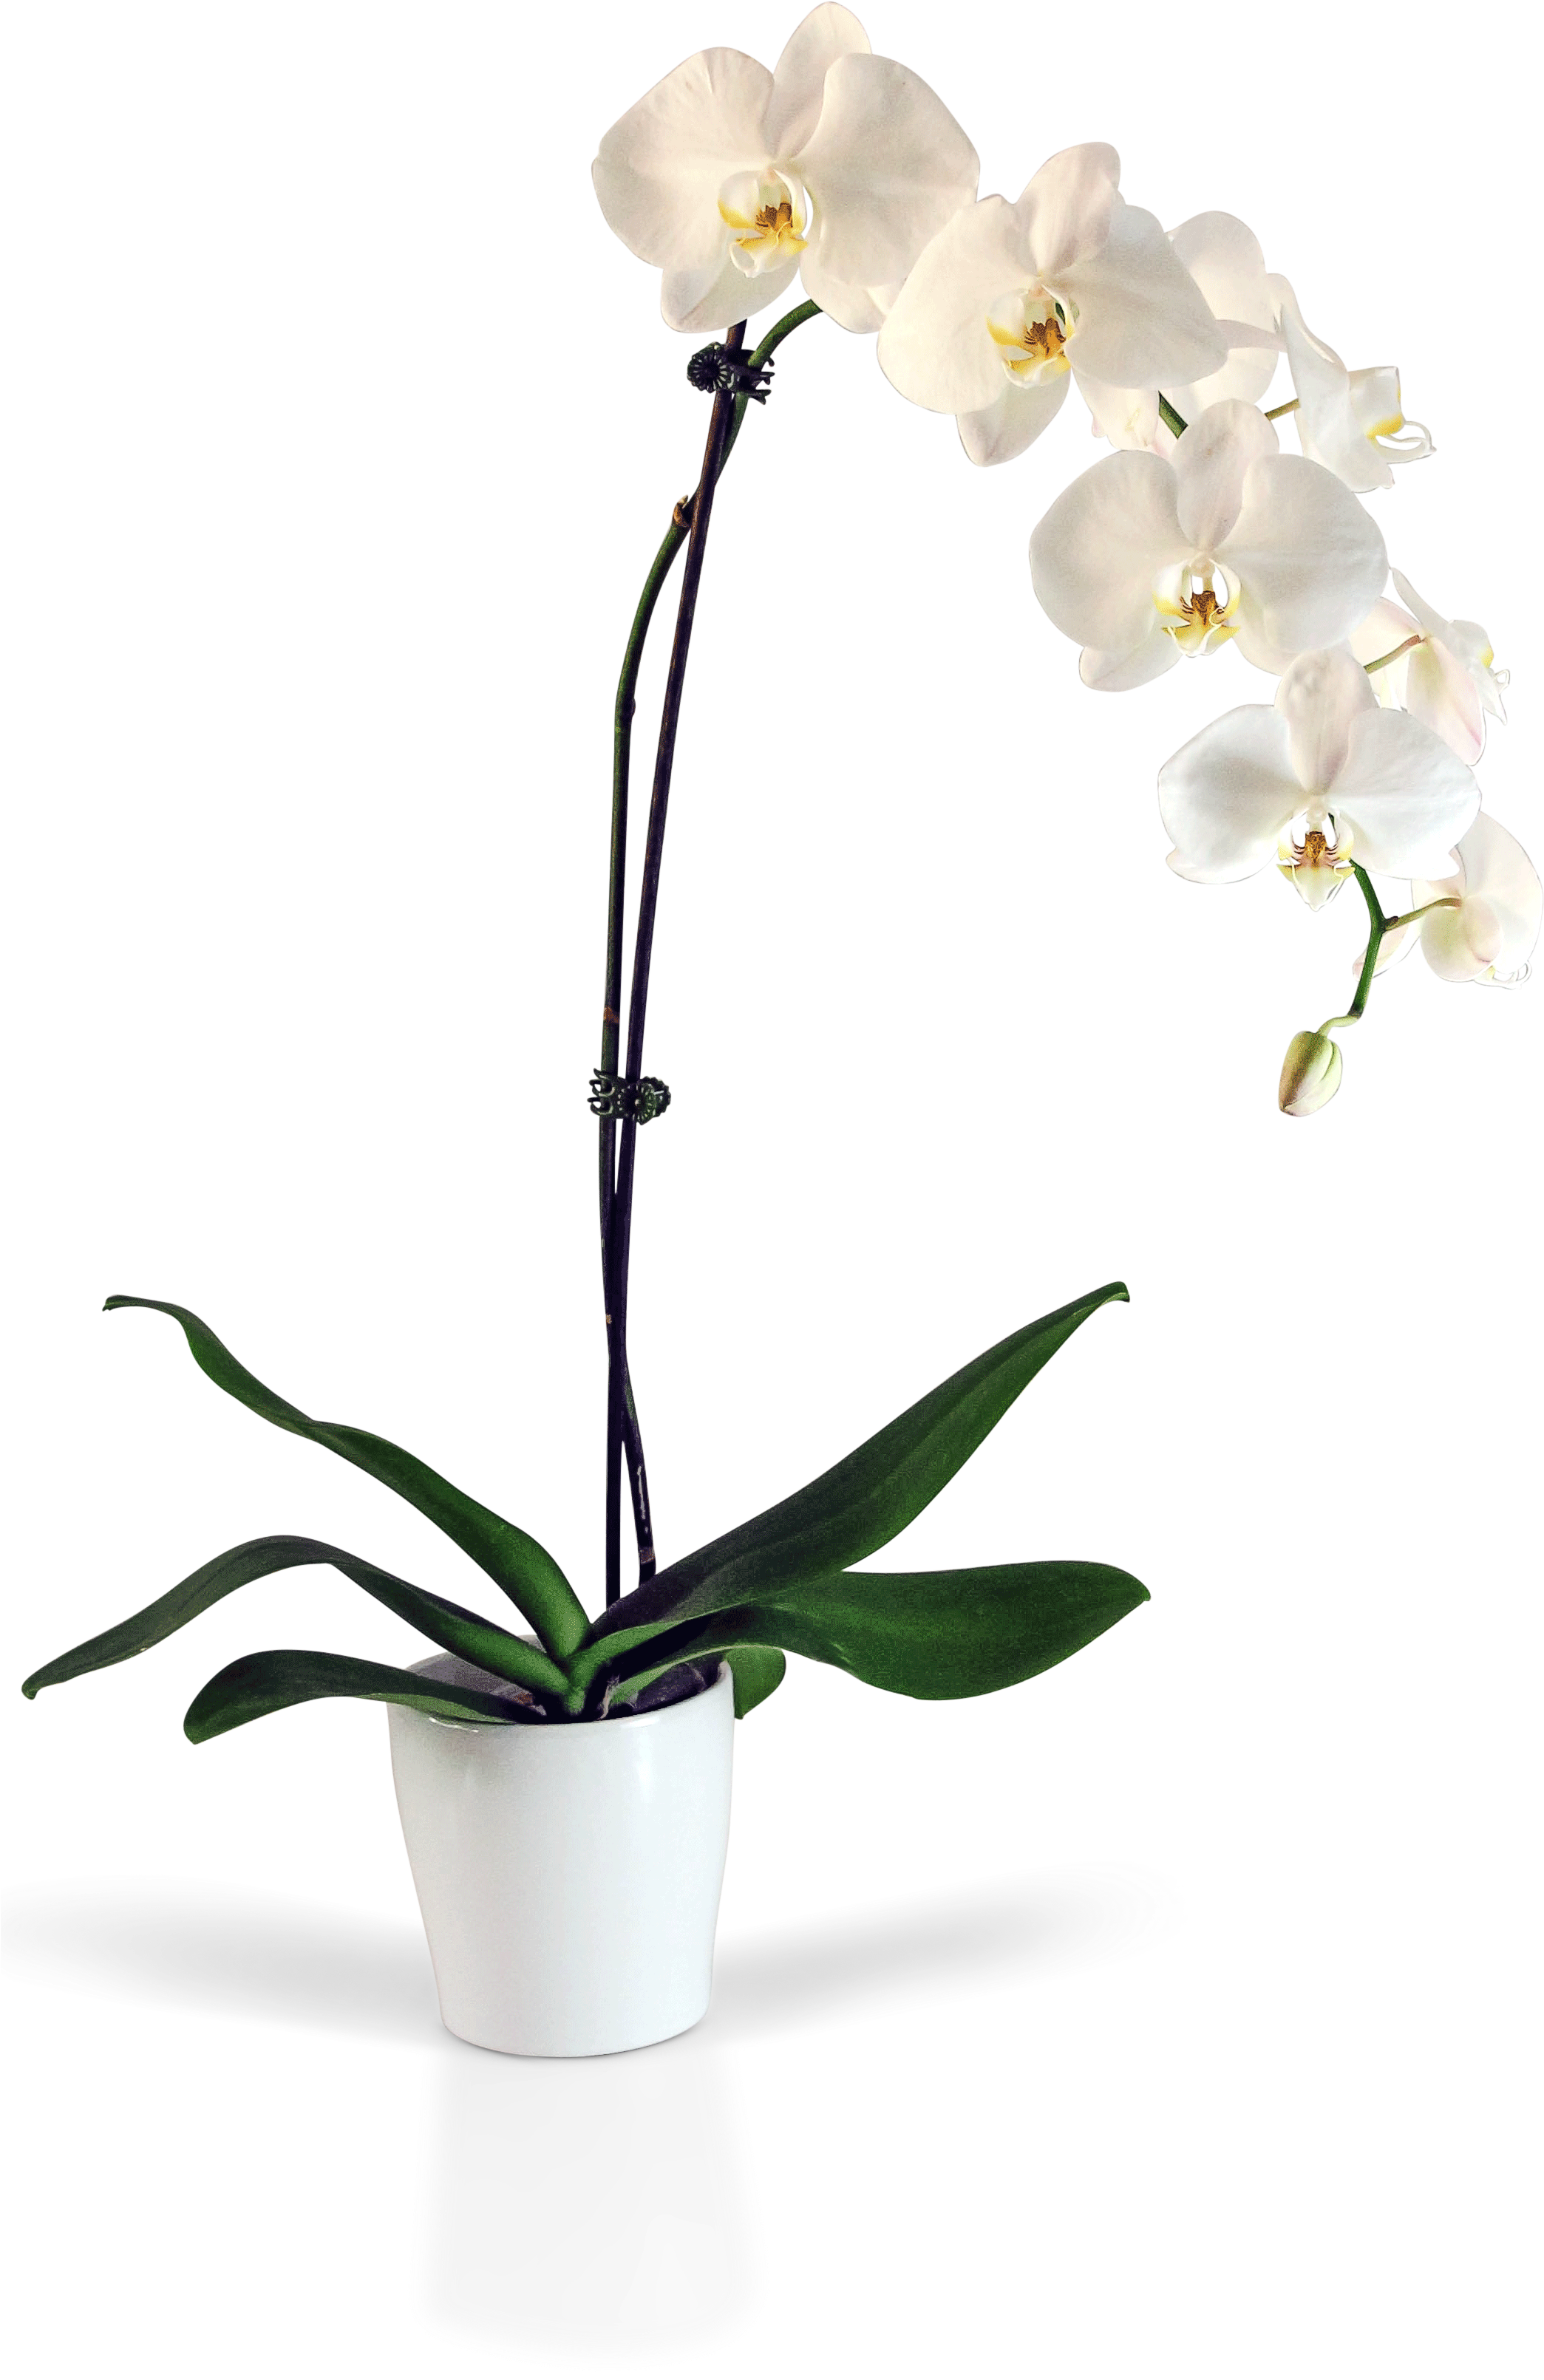 A White Orchid In A White Pot